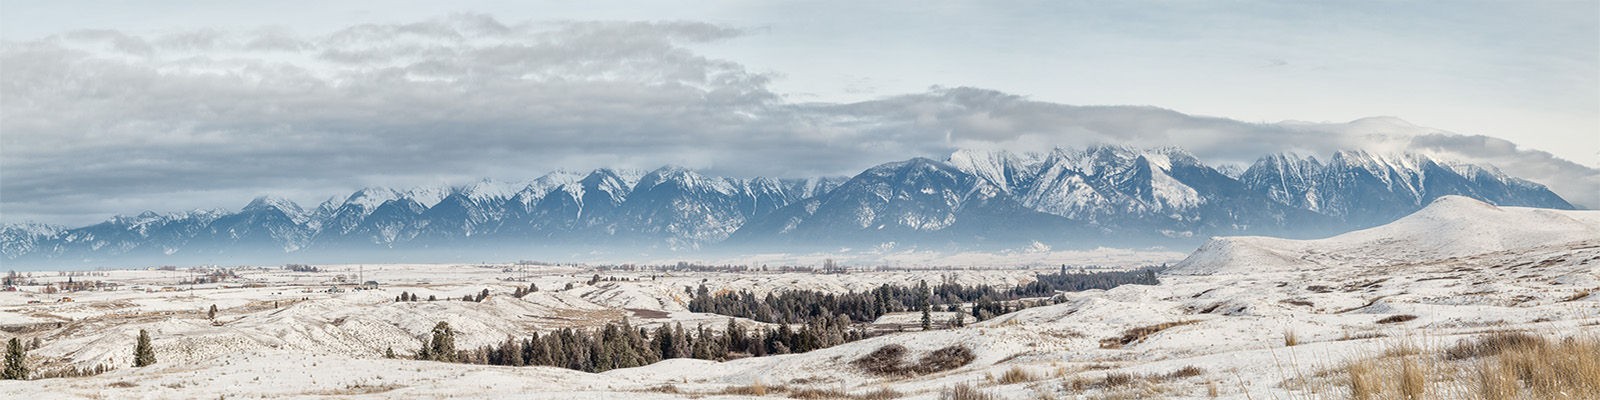 2016_01_12_Montana-10377-Pano-Edit1000.jpg - Mission Mountains from the National Bison Range.  The sky began to clear briefly in the late afternoon, revealing some of the peaks of the mountains.  This was taken from the Prairie Drive.                                                                      The National Bison Range is one of the oldest National Wildlife Refuges in the US, it was established in 1908 and contains 18,800 acres of land.  There is a small bison herd that is the focus of bison research.  The herd contains between 350 and 500 bison and was started originally with bison provided by the American Bison Society,  a group that was founded in 1905 by Theodore Roosevelt and William Hornaday (who later became the first director of the Bronx Zoo) to help save the Bison from extinction.  There are two drives in the National Bison Range.  Only the Prairie Drive is open in winter.